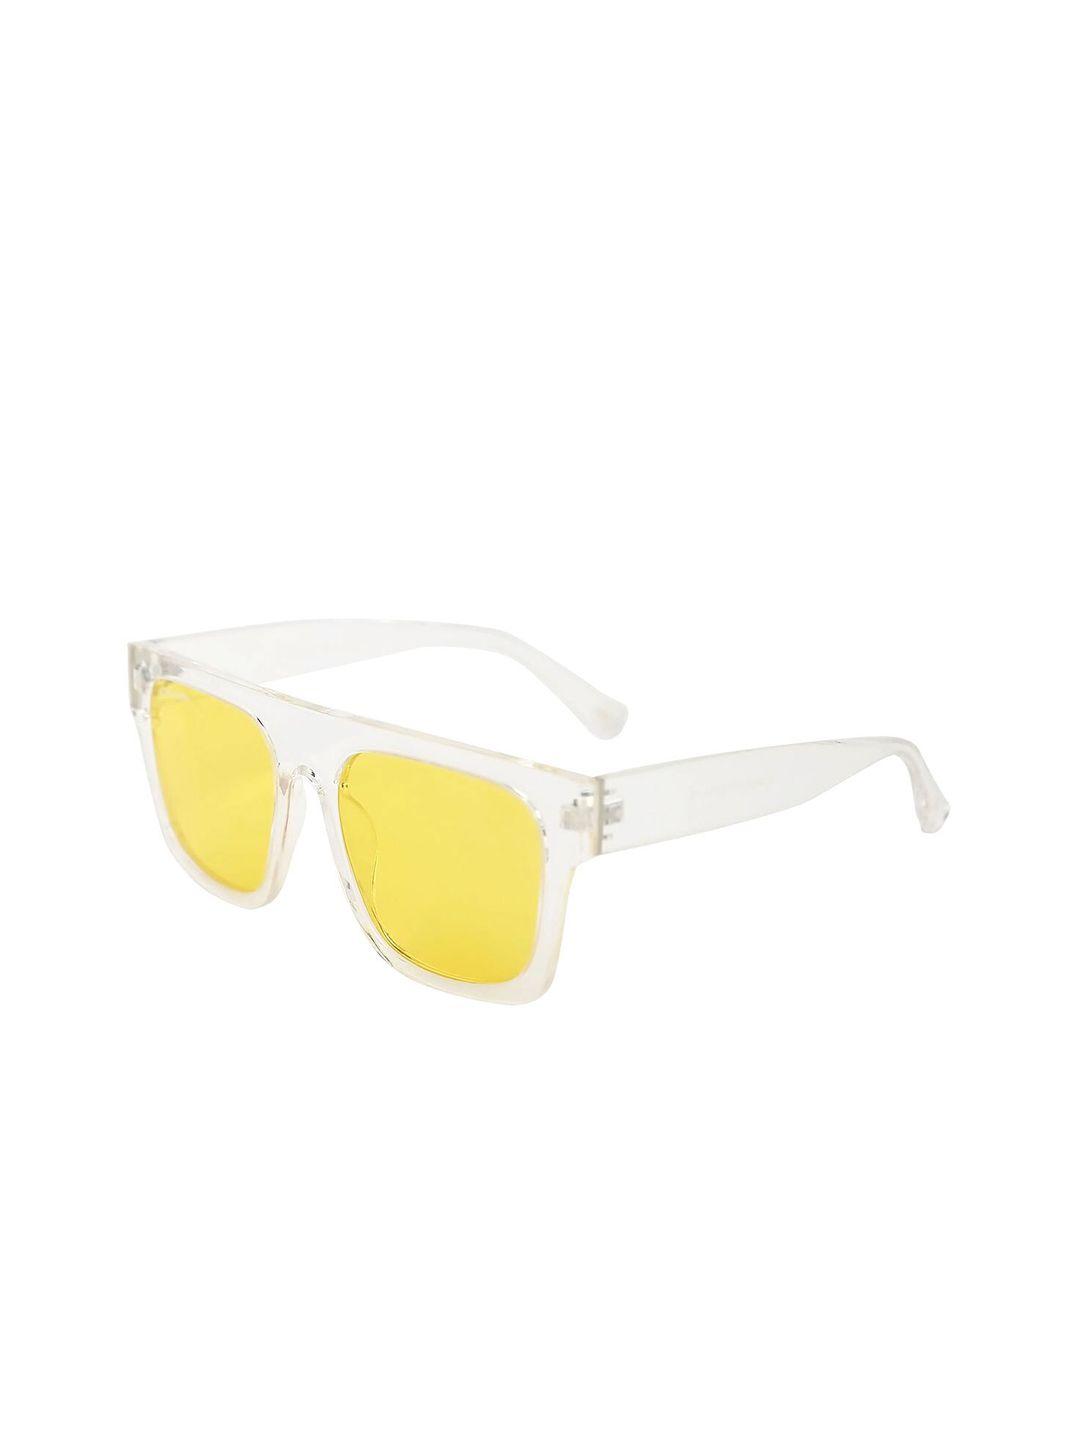 micelo martin men yellow lens & white square sunglasses with uv protected lens